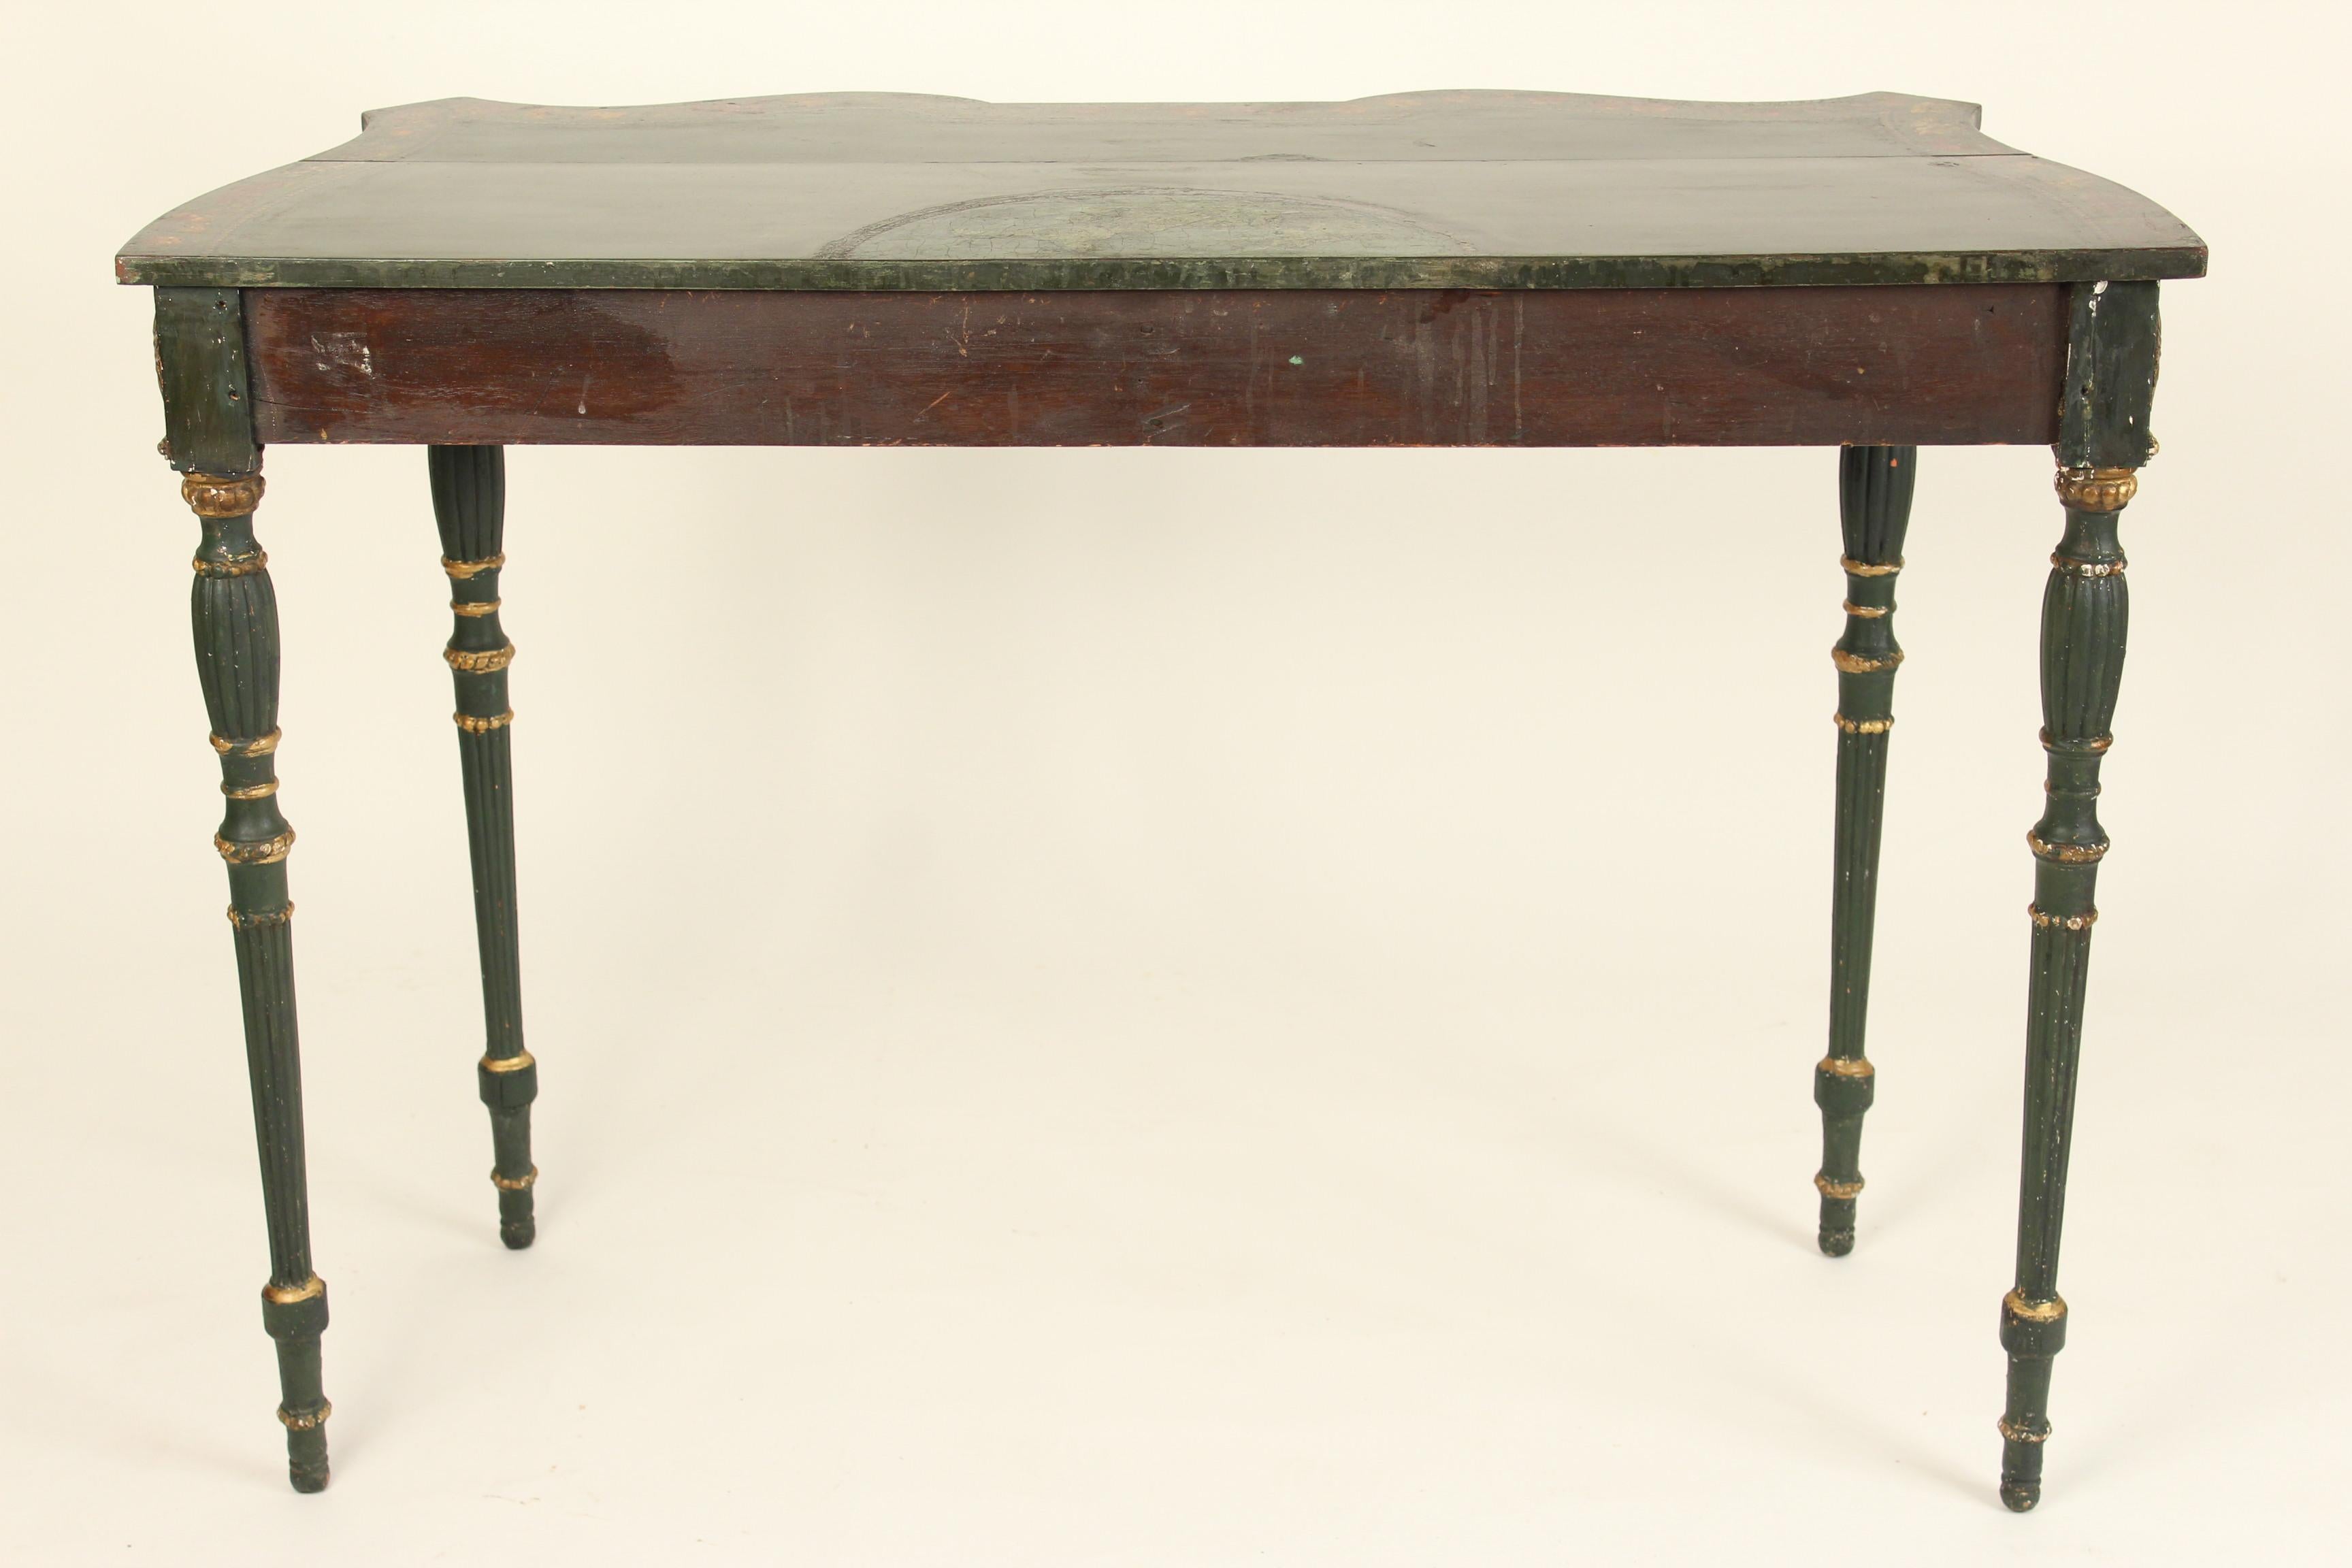 Early 20th Century English Edwardian Painted Console Table